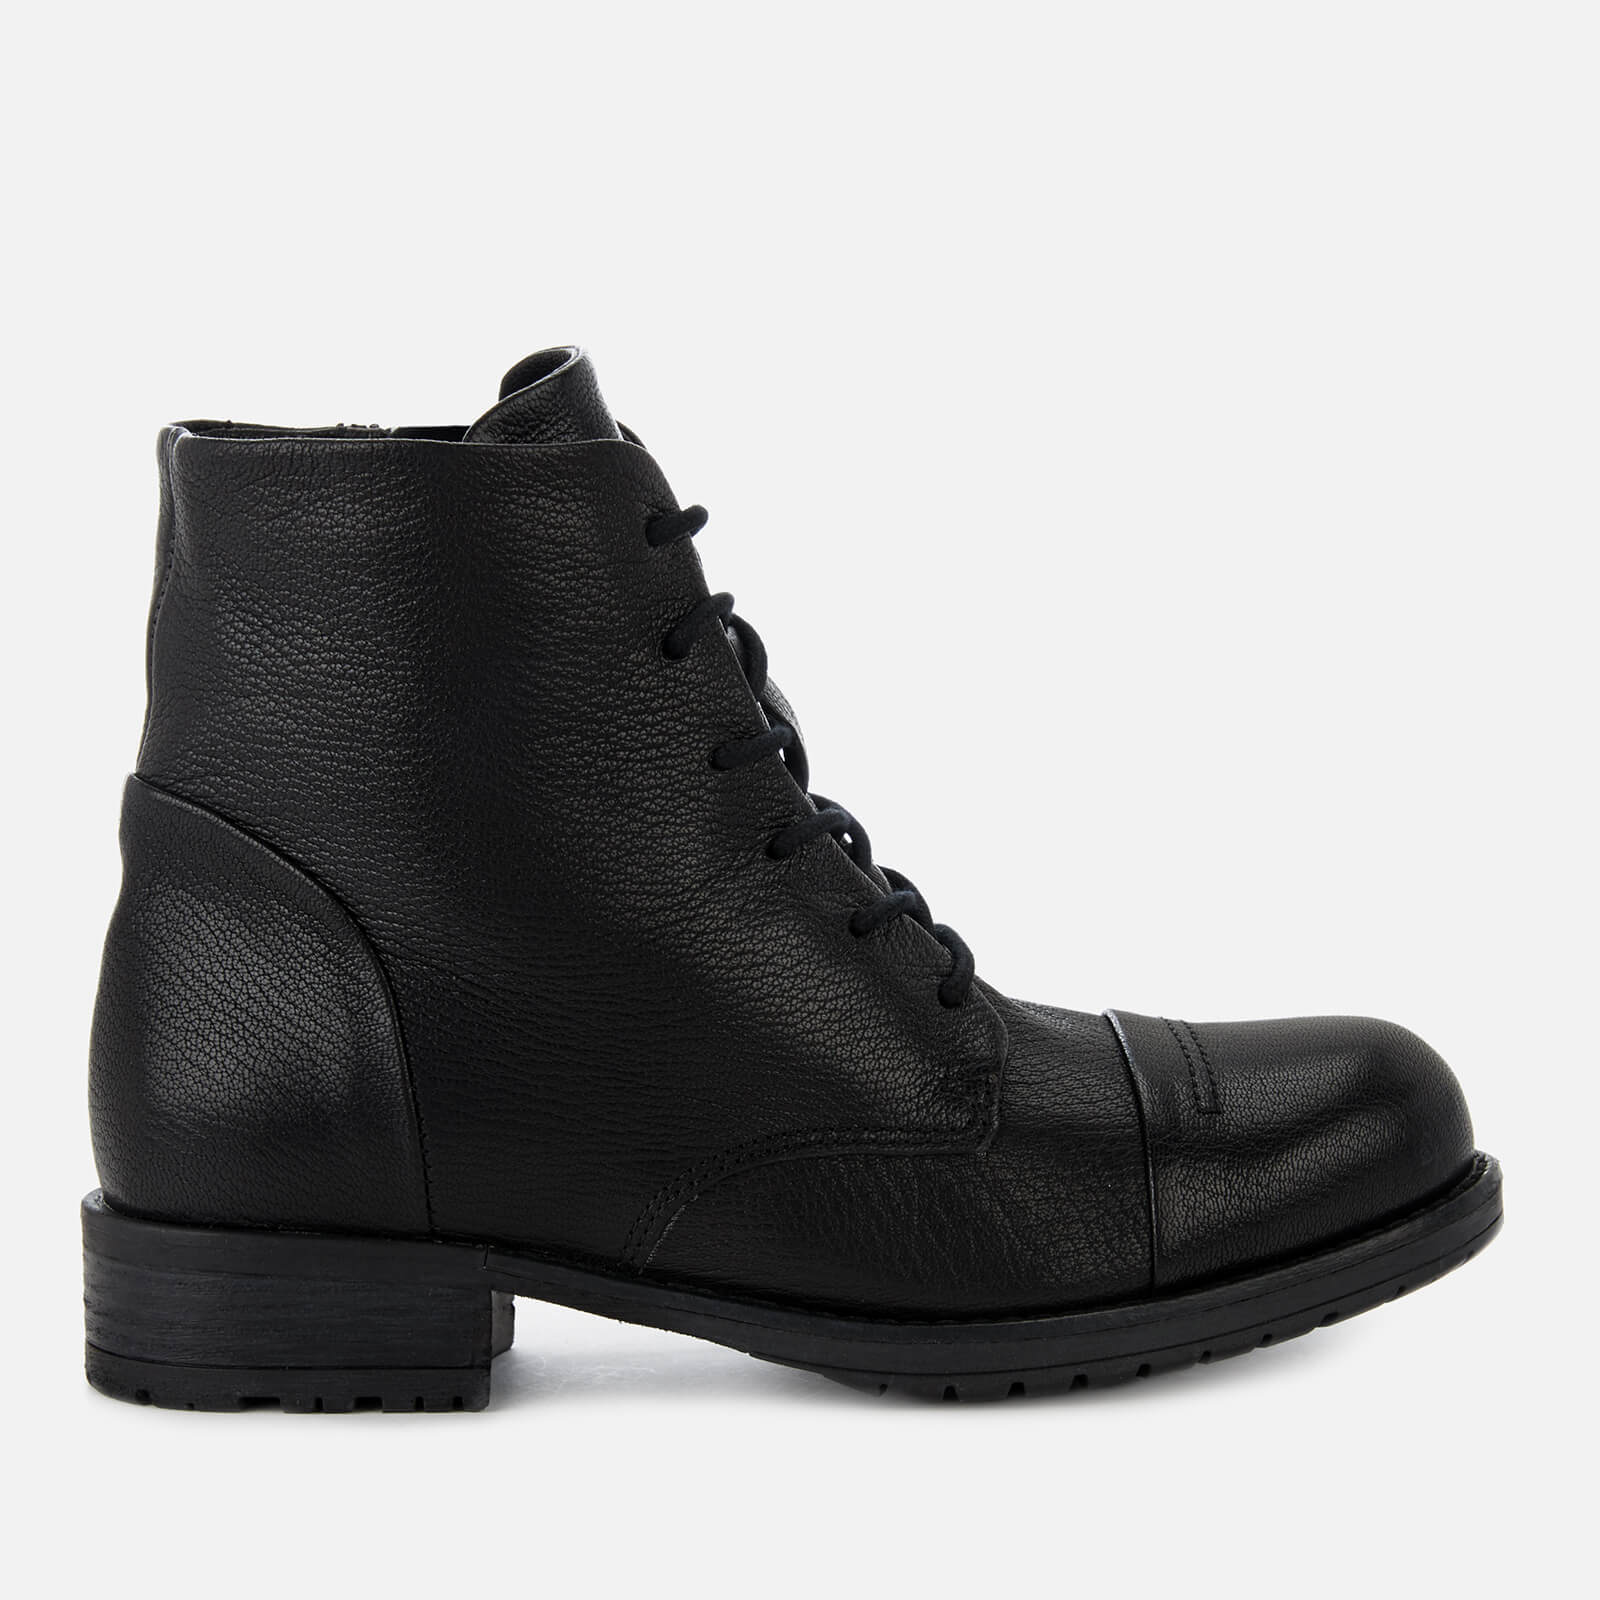 clarks women's lace up ankle boots